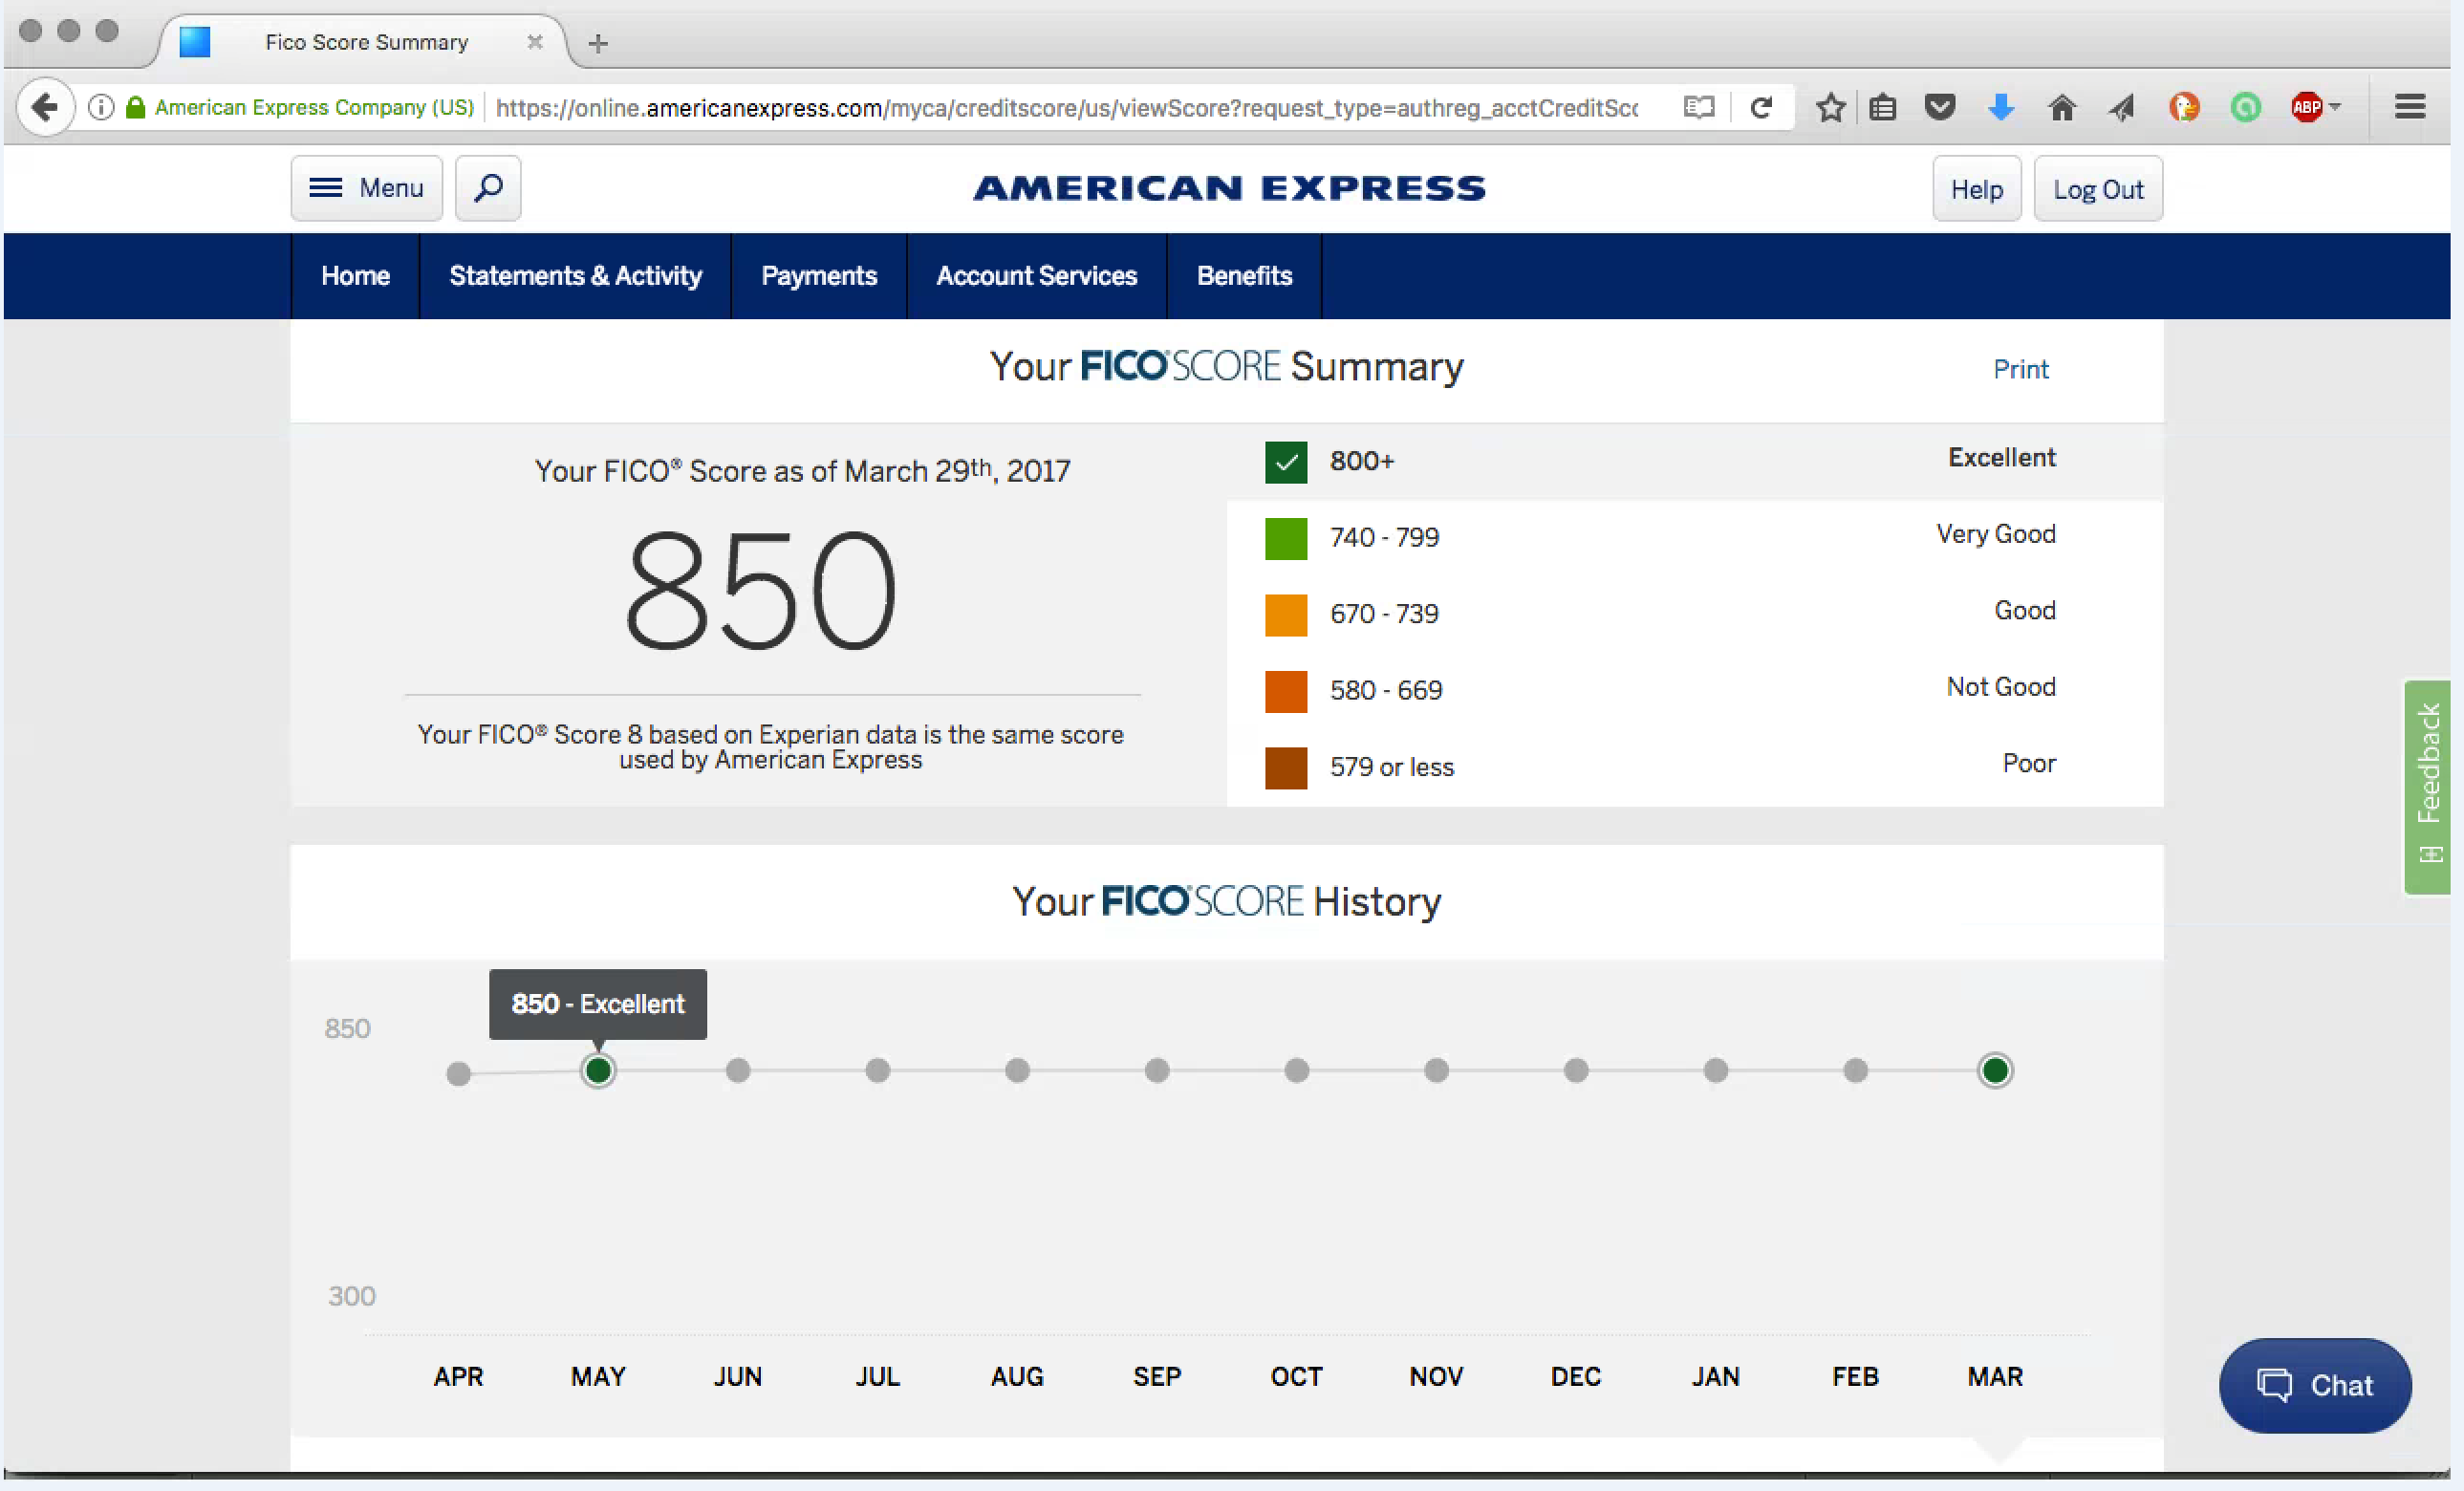 How To Get A Perfect FICO Credit Score of 850